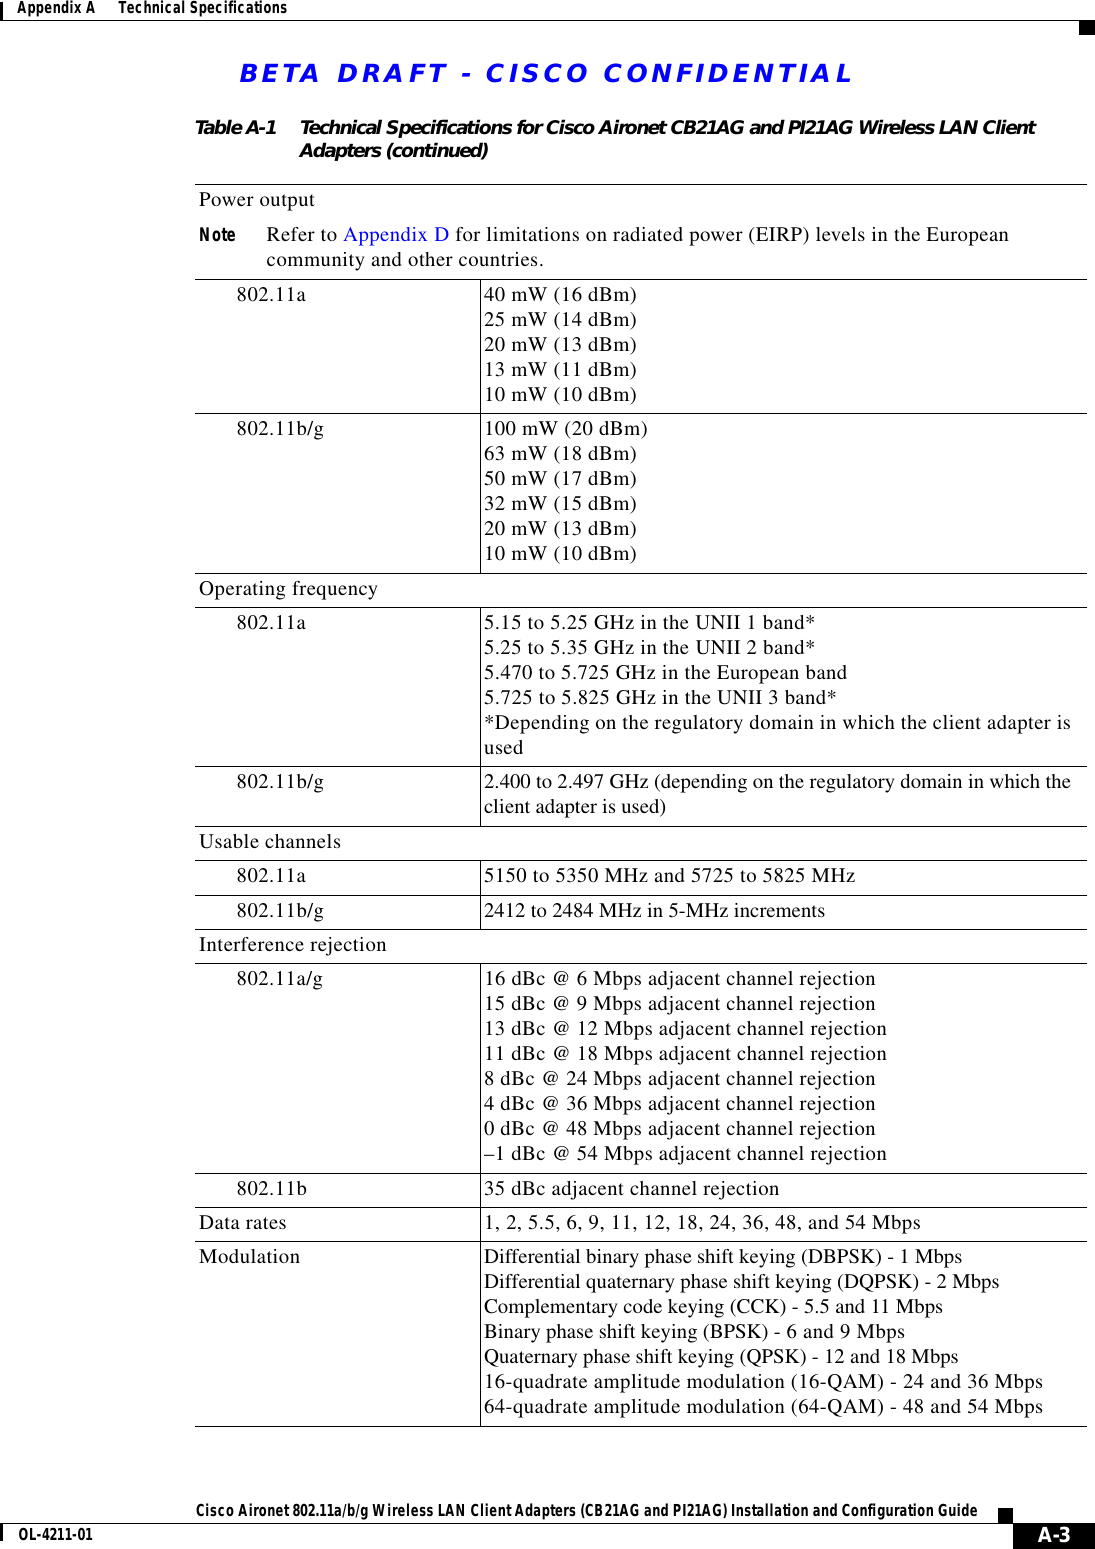 BETA DRAFT - CISCO CONFIDENTIAL A-3Cisco Aironet 802.11a/b/g Wireless LAN Client Adapters (CB21AG and PI21AG) Installation and Configuration GuideOL-4211-01Appendix A      Technical SpecificationsPower output Note Refer to Appendix D for limitations on radiated power (EIRP) levels in the European community and other countries.802.11a 40 mW (16 dBm)25 mW (14 dBm)20 mW (13 dBm)13 mW (11 dBm)10 mW (10 dBm)802.11b/g 100 mW (20 dBm)63 mW (18 dBm)50 mW (17 dBm)32 mW (15 dBm)20 mW (13 dBm)10 mW (10 dBm)Operating frequency802.11a 5.15 to 5.25 GHz in the UNII 1 band*5.25 to 5.35 GHz in the UNII 2 band*5.470 to 5.725 GHz in the European band5.725 to 5.825 GHz in the UNII 3 band**Depending on the regulatory domain in which the client adapter is used802.11b/g 2.400 to 2.497 GHz (depending on the regulatory domain in which the client adapter is used)Usable channels802.11a 5150 to 5350 MHz and 5725 to 5825 MHz802.11b/g 2412 to 2484 MHz in 5-MHz incrementsInterference rejection802.11a/g 16 dBc @ 6 Mbps adjacent channel rejection15 dBc @ 9 Mbps adjacent channel rejection13 dBc @ 12 Mbps adjacent channel rejection11 dBc @ 18 Mbps adjacent channel rejection8 dBc @ 24 Mbps adjacent channel rejection4 dBc @ 36 Mbps adjacent channel rejection0 dBc @ 48 Mbps adjacent channel rejection–1 dBc @ 54 Mbps adjacent channel rejection802.11b 35 dBc adjacent channel rejectionData rates 1, 2, 5.5, 6, 9, 11, 12, 18, 24, 36, 48, and 54 MbpsModulation Differential binary phase shift keying (DBPSK) - 1 MbpsDifferential quaternary phase shift keying (DQPSK) - 2 MbpsComplementary code keying (CCK) - 5.5 and 11 MbpsBinary phase shift keying (BPSK) - 6 and 9 MbpsQuaternary phase shift keying (QPSK) - 12 and 18 Mbps16-quadrate amplitude modulation (16-QAM) - 24 and 36 Mbps64-quadrate amplitude modulation (64-QAM) - 48 and 54 MbpsTable A-1 Technical Specifications for Cisco Aironet CB21AG and PI21AG Wireless LAN Client Adapters (continued)